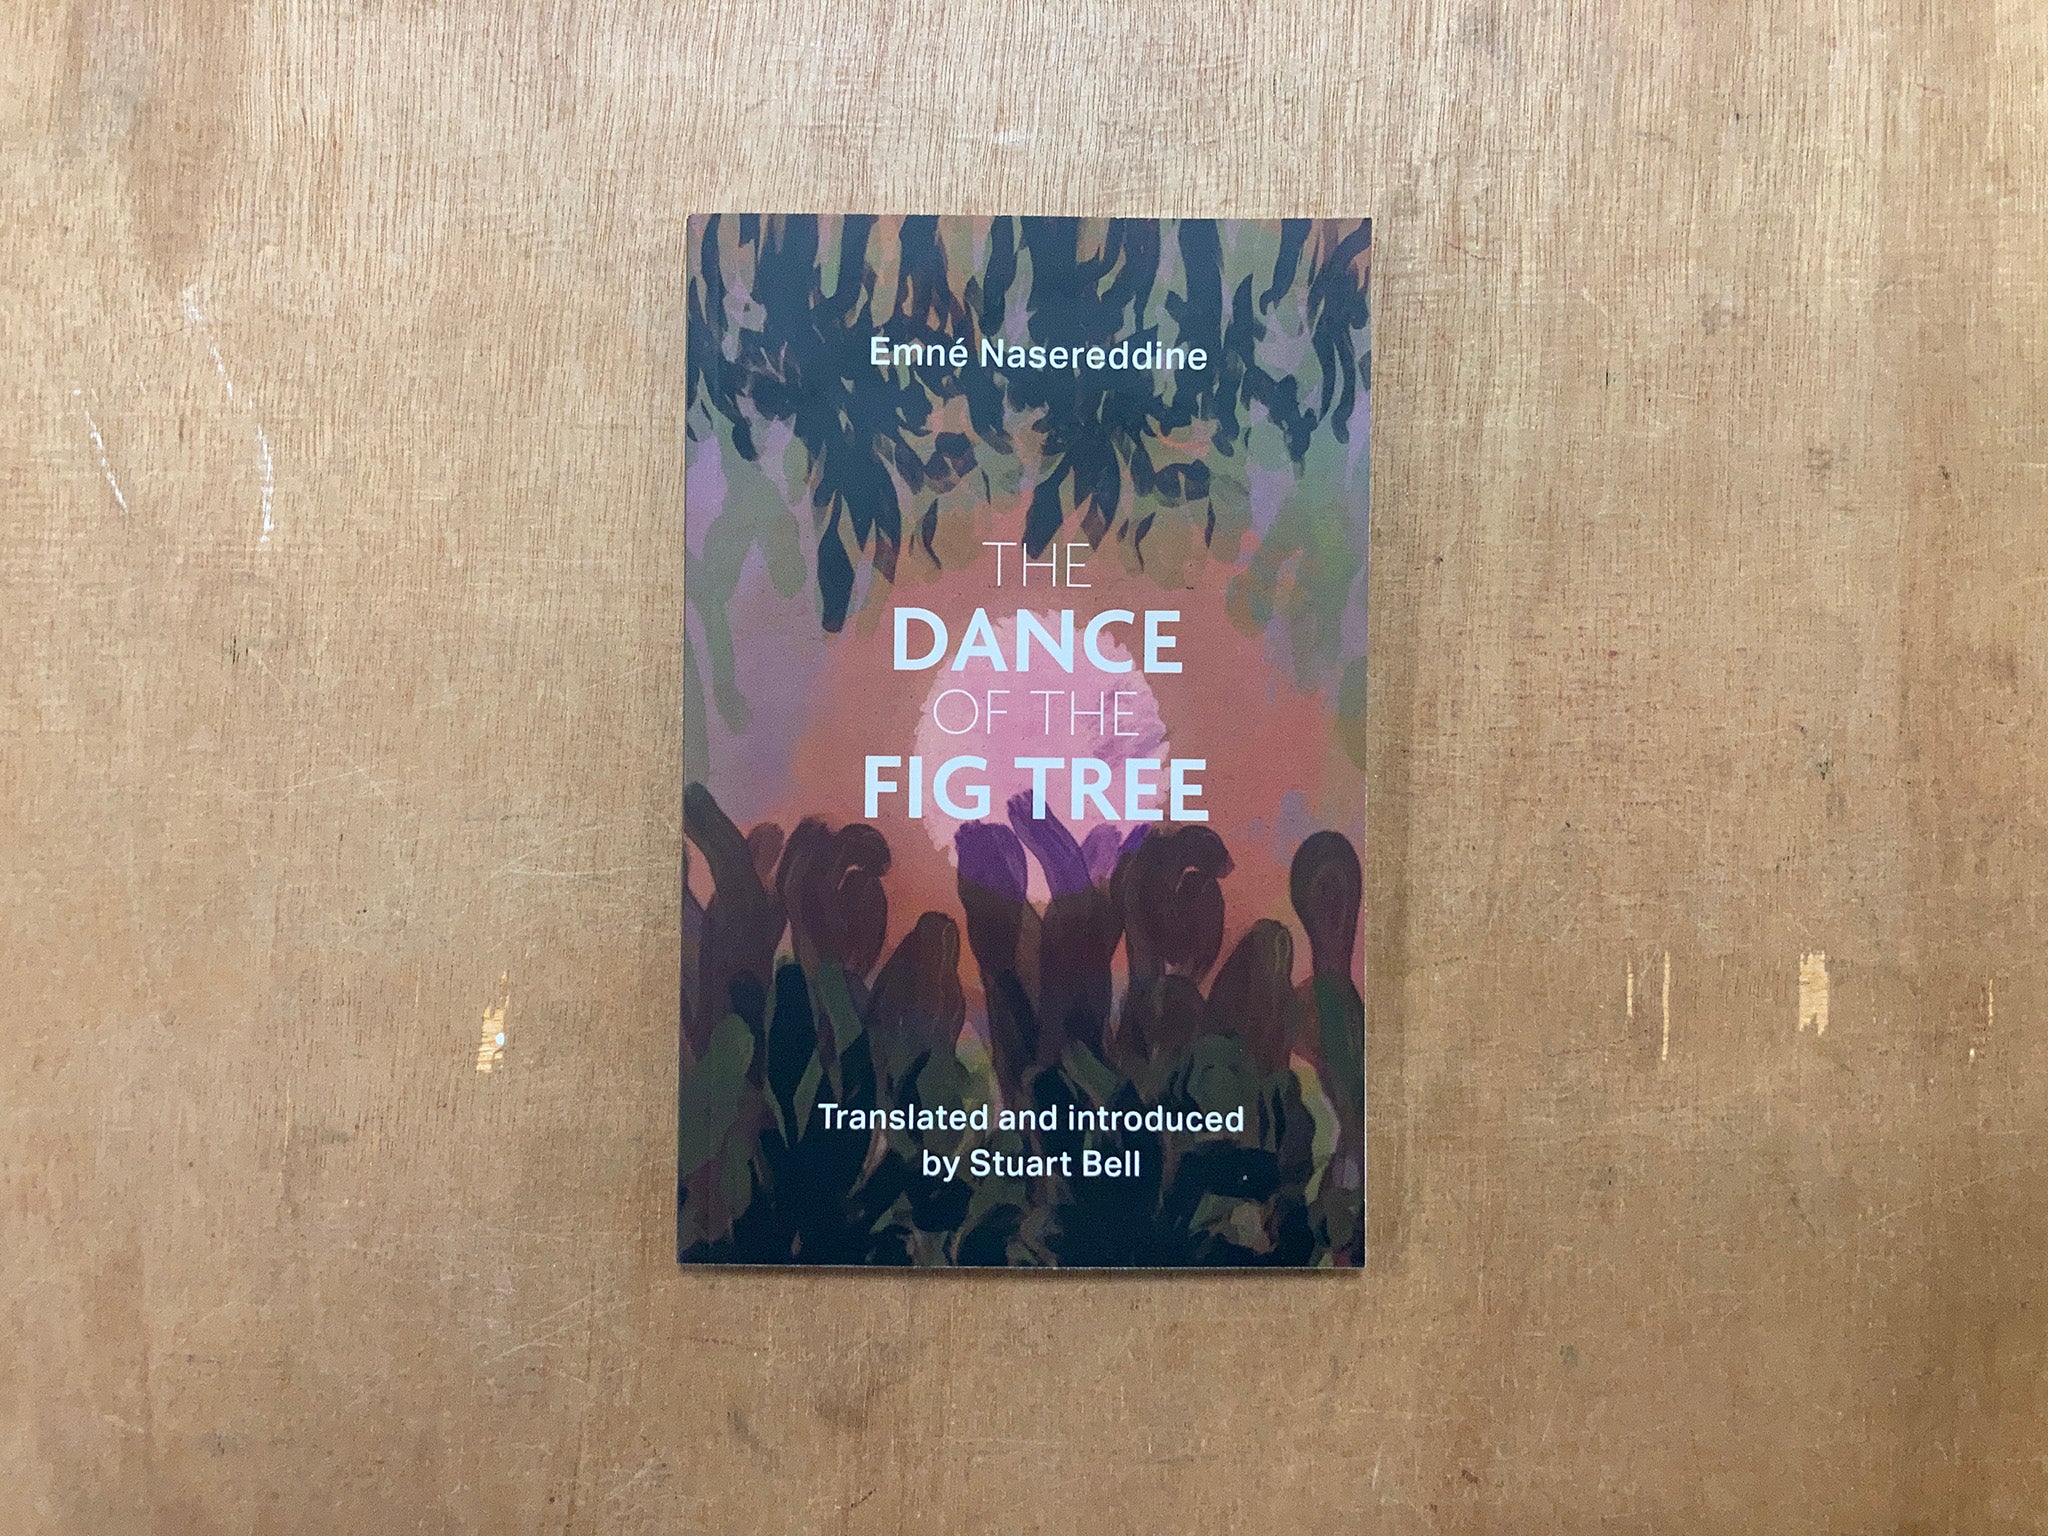 THE DANCE OF THE FIG TREE by Emné Nasereddine